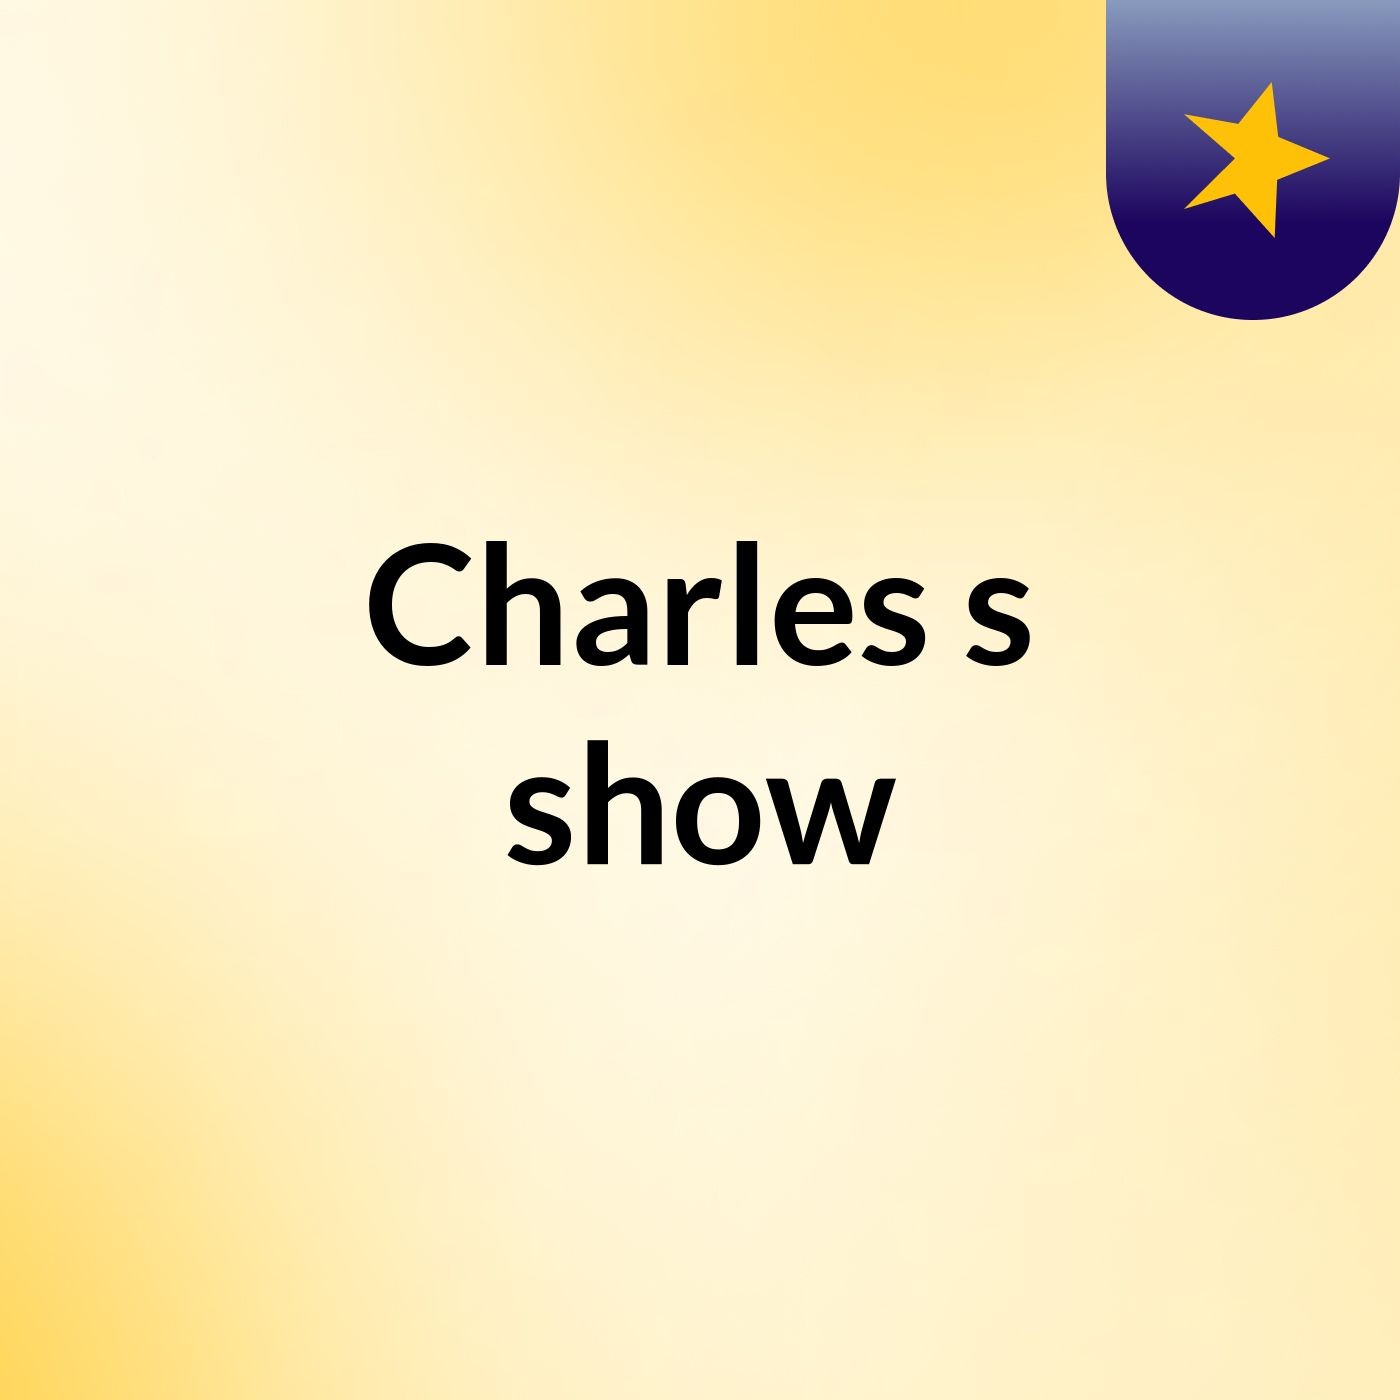 Charles's show